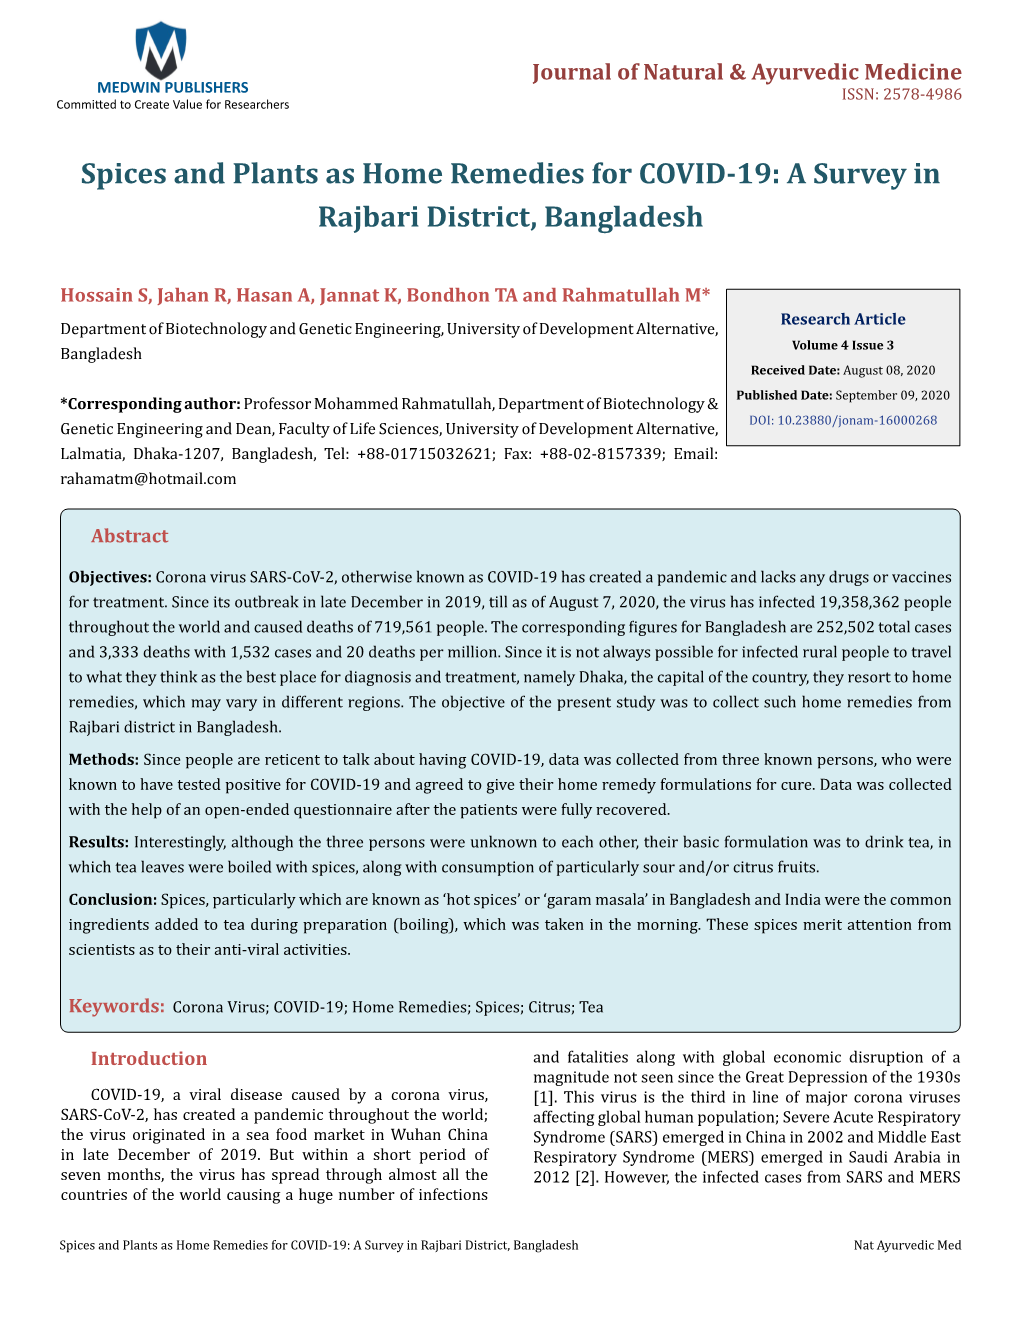 Spices and Plants As Home Remedies for COVID-19: a Survey in Rajbari District, Bangladesh